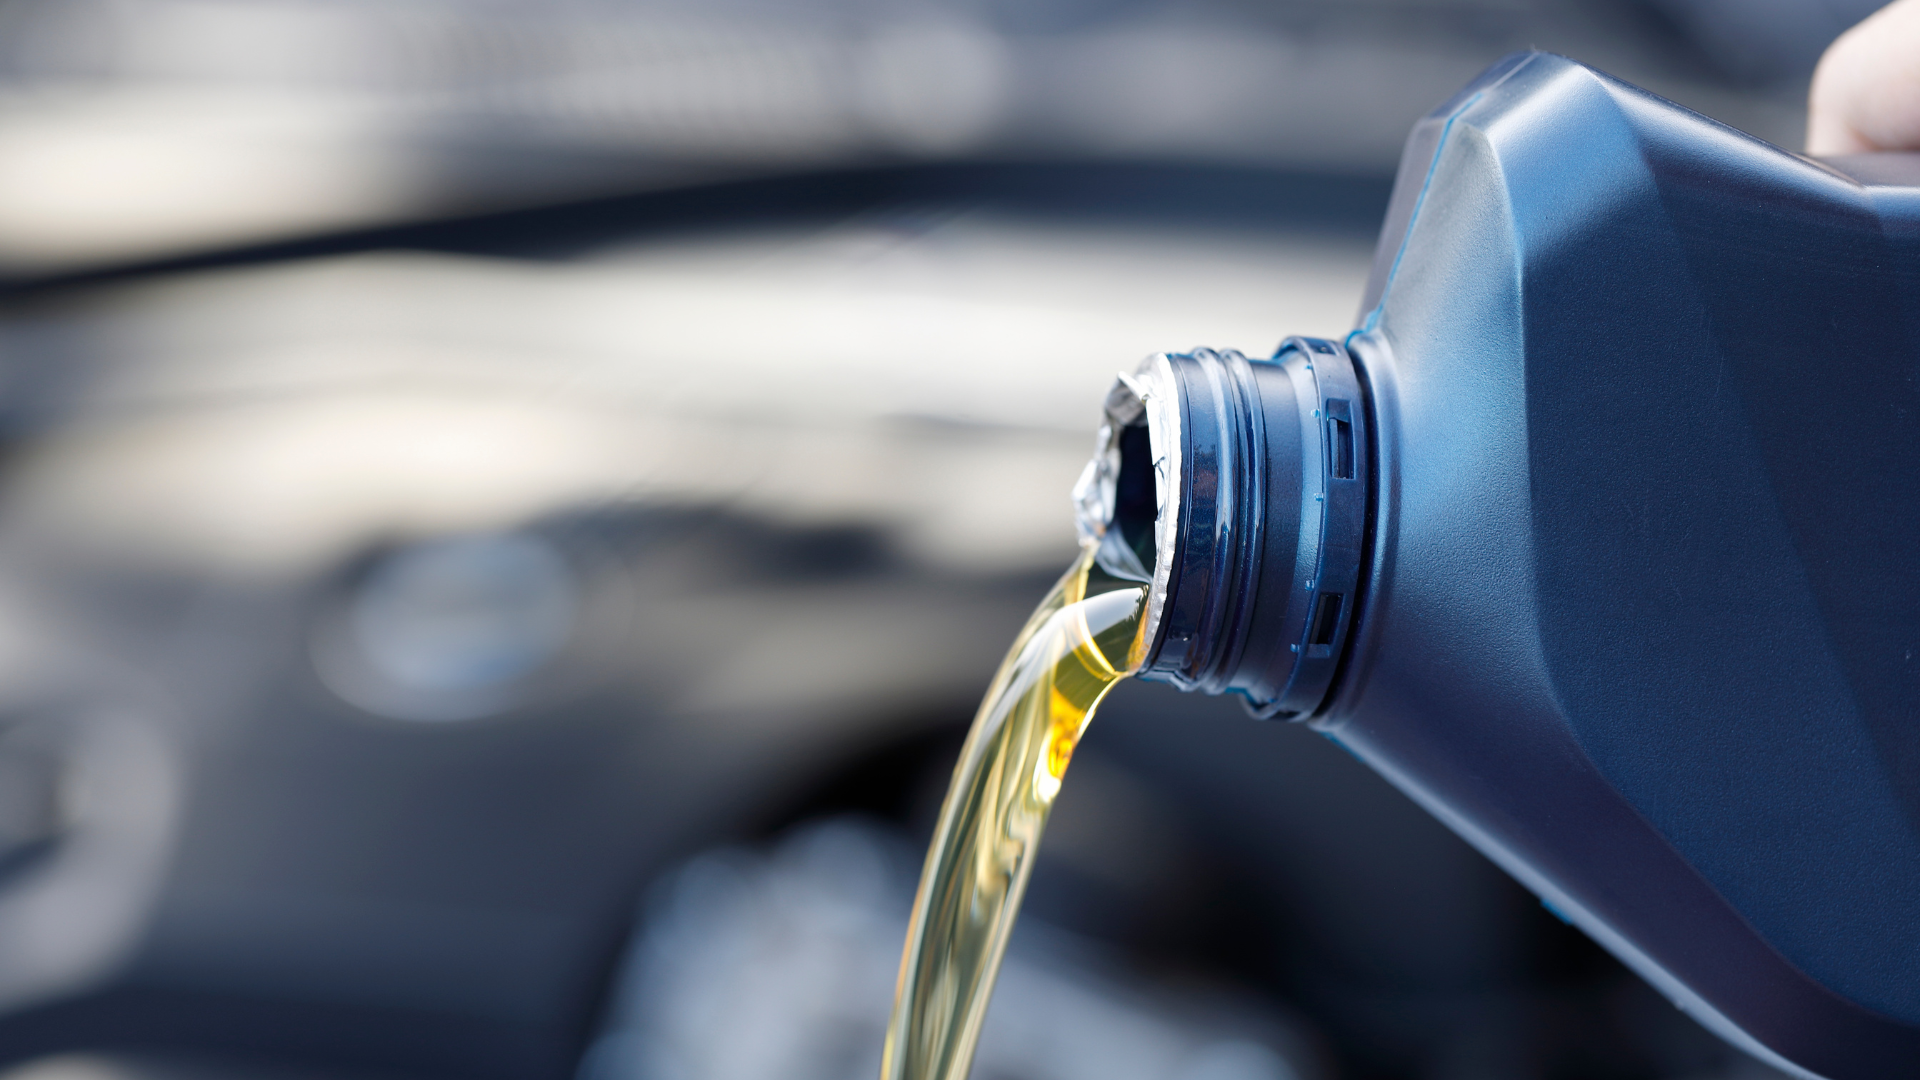 10 Most Googled Questions About Engine Oil, Answered!